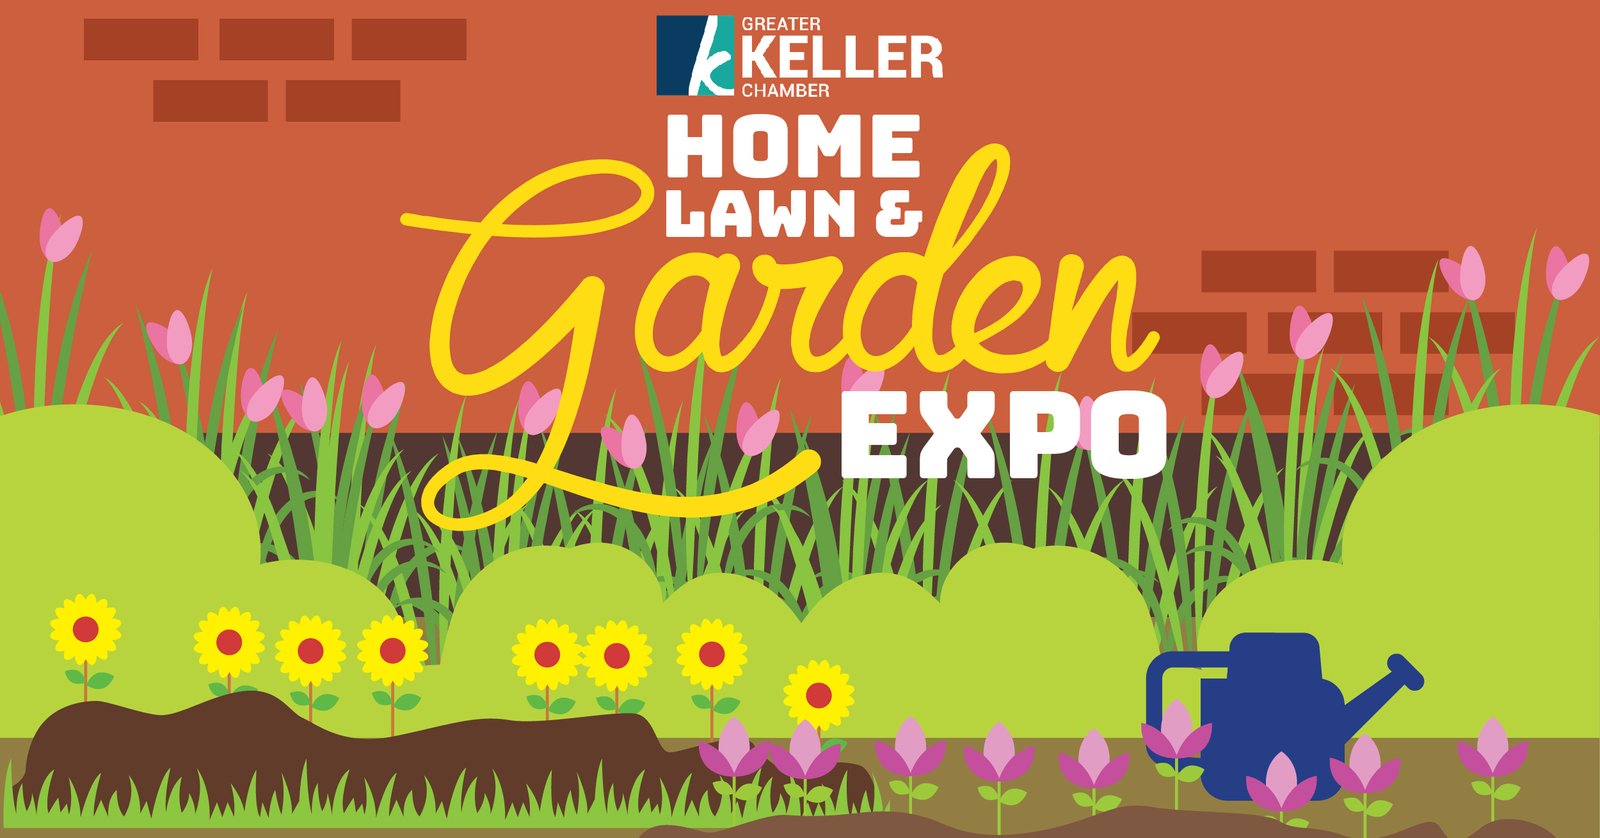 Greater Keller Chamber of Commerce Home Lawn and Garden Expo logo